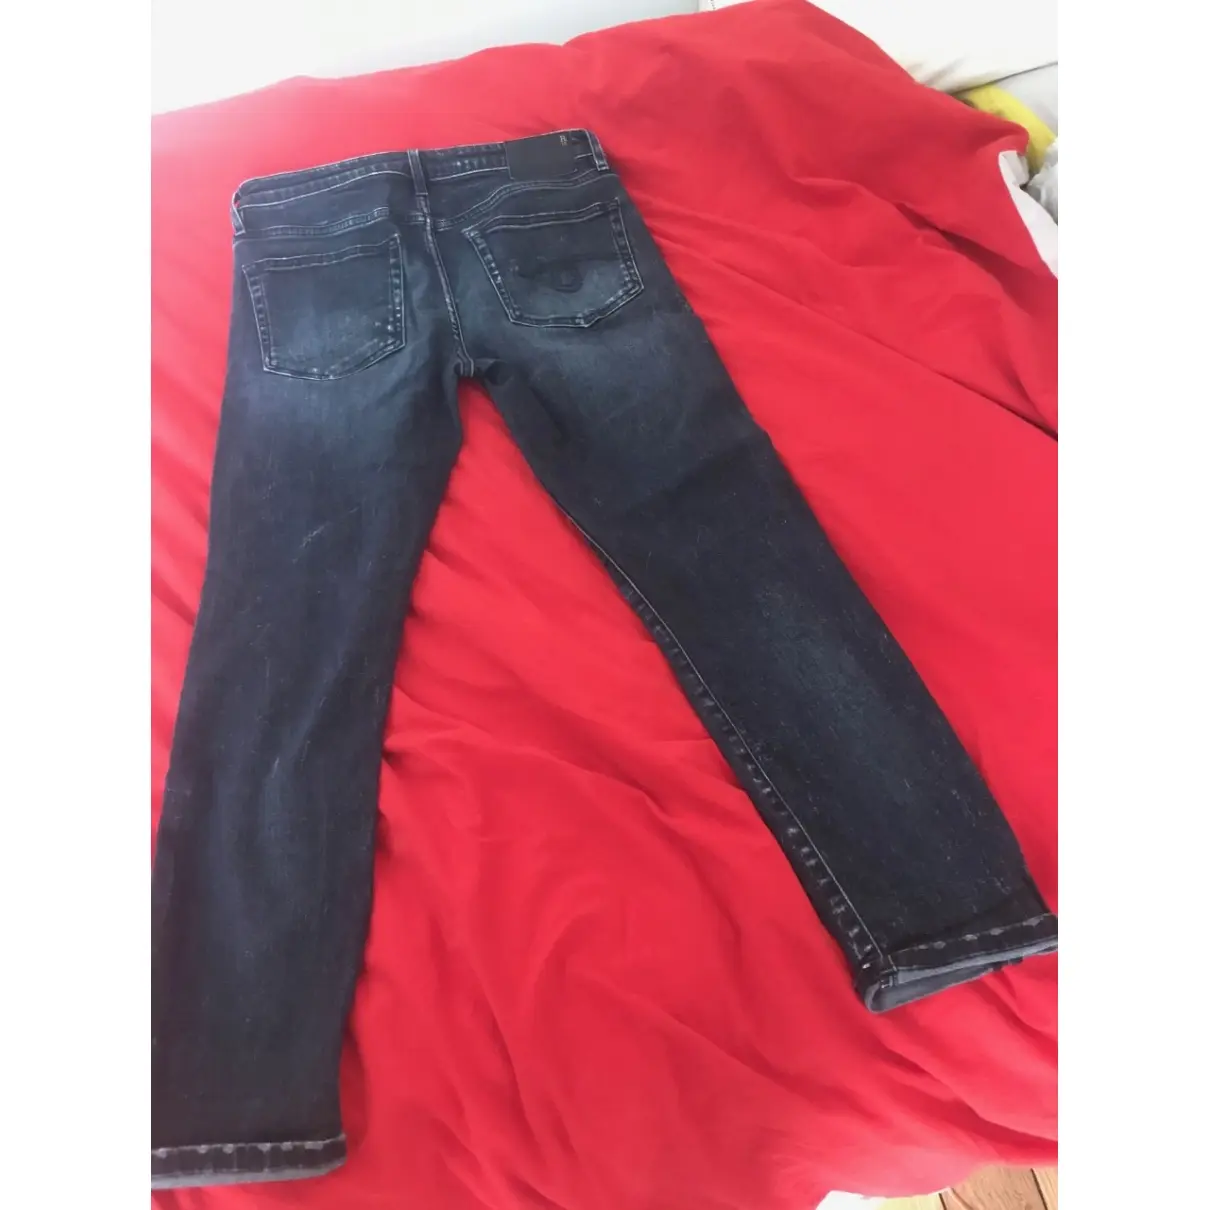 R13 Straight jeans for sale